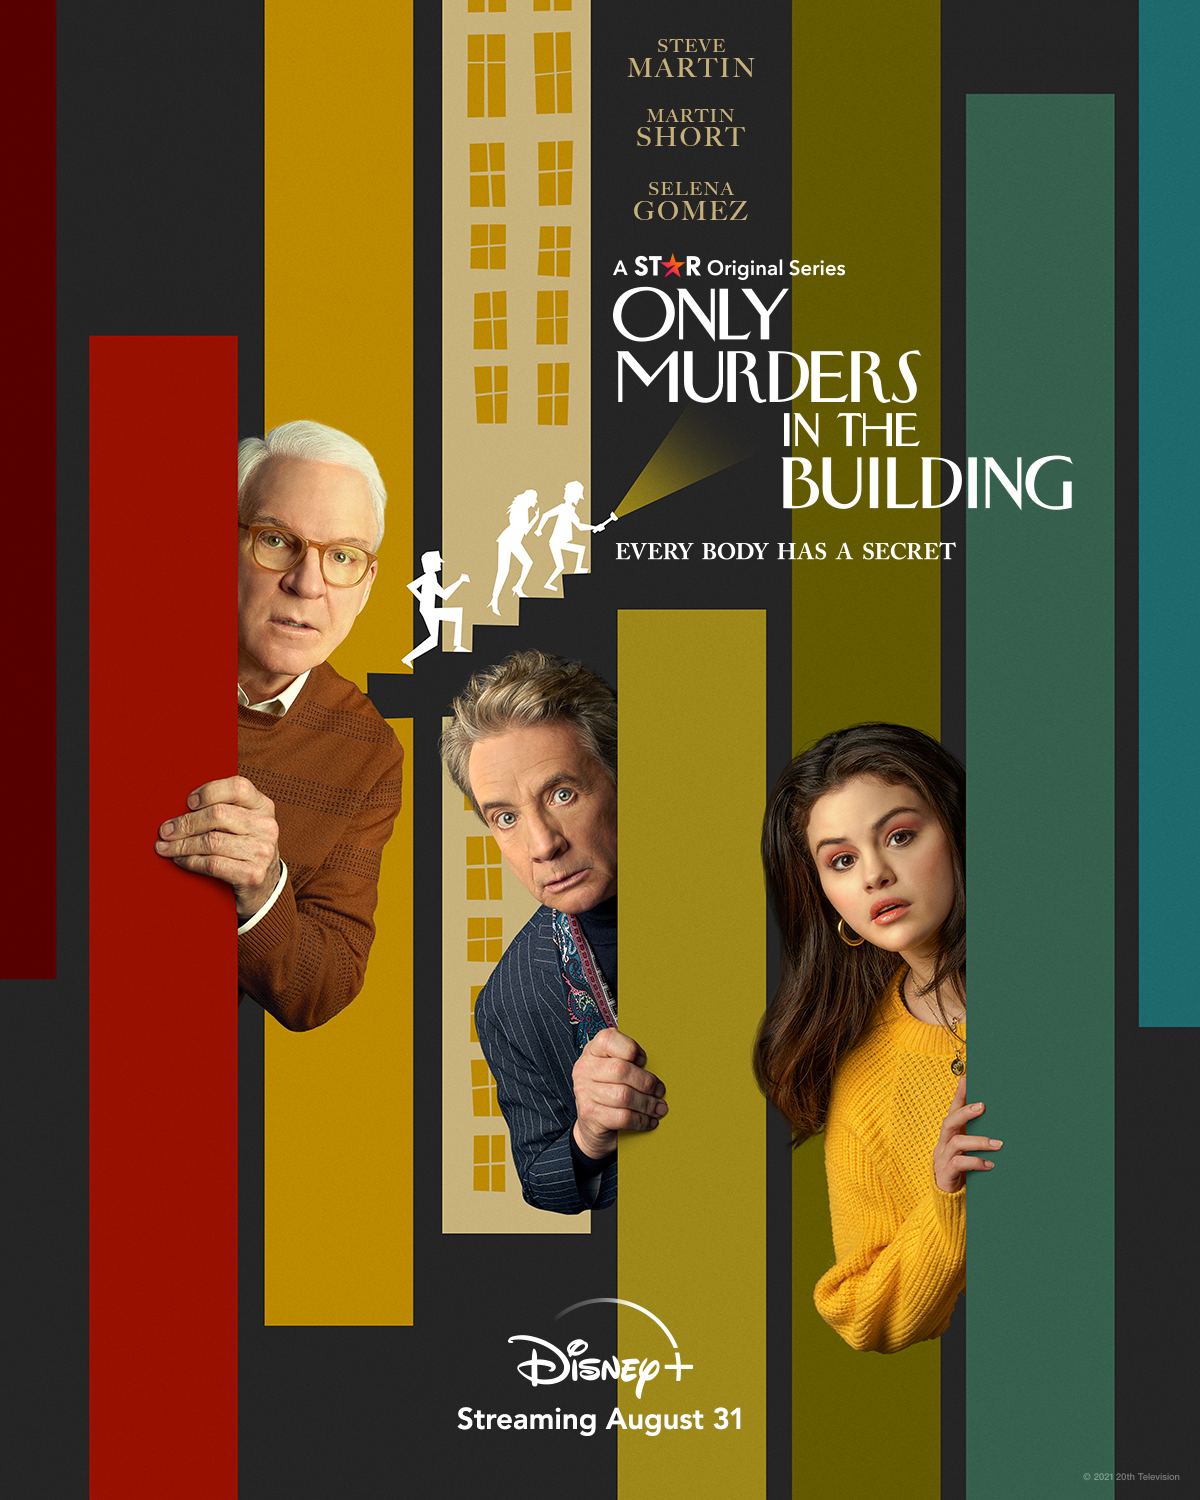 image for  Only Murders in the Building Season 1 Episode 1 movie